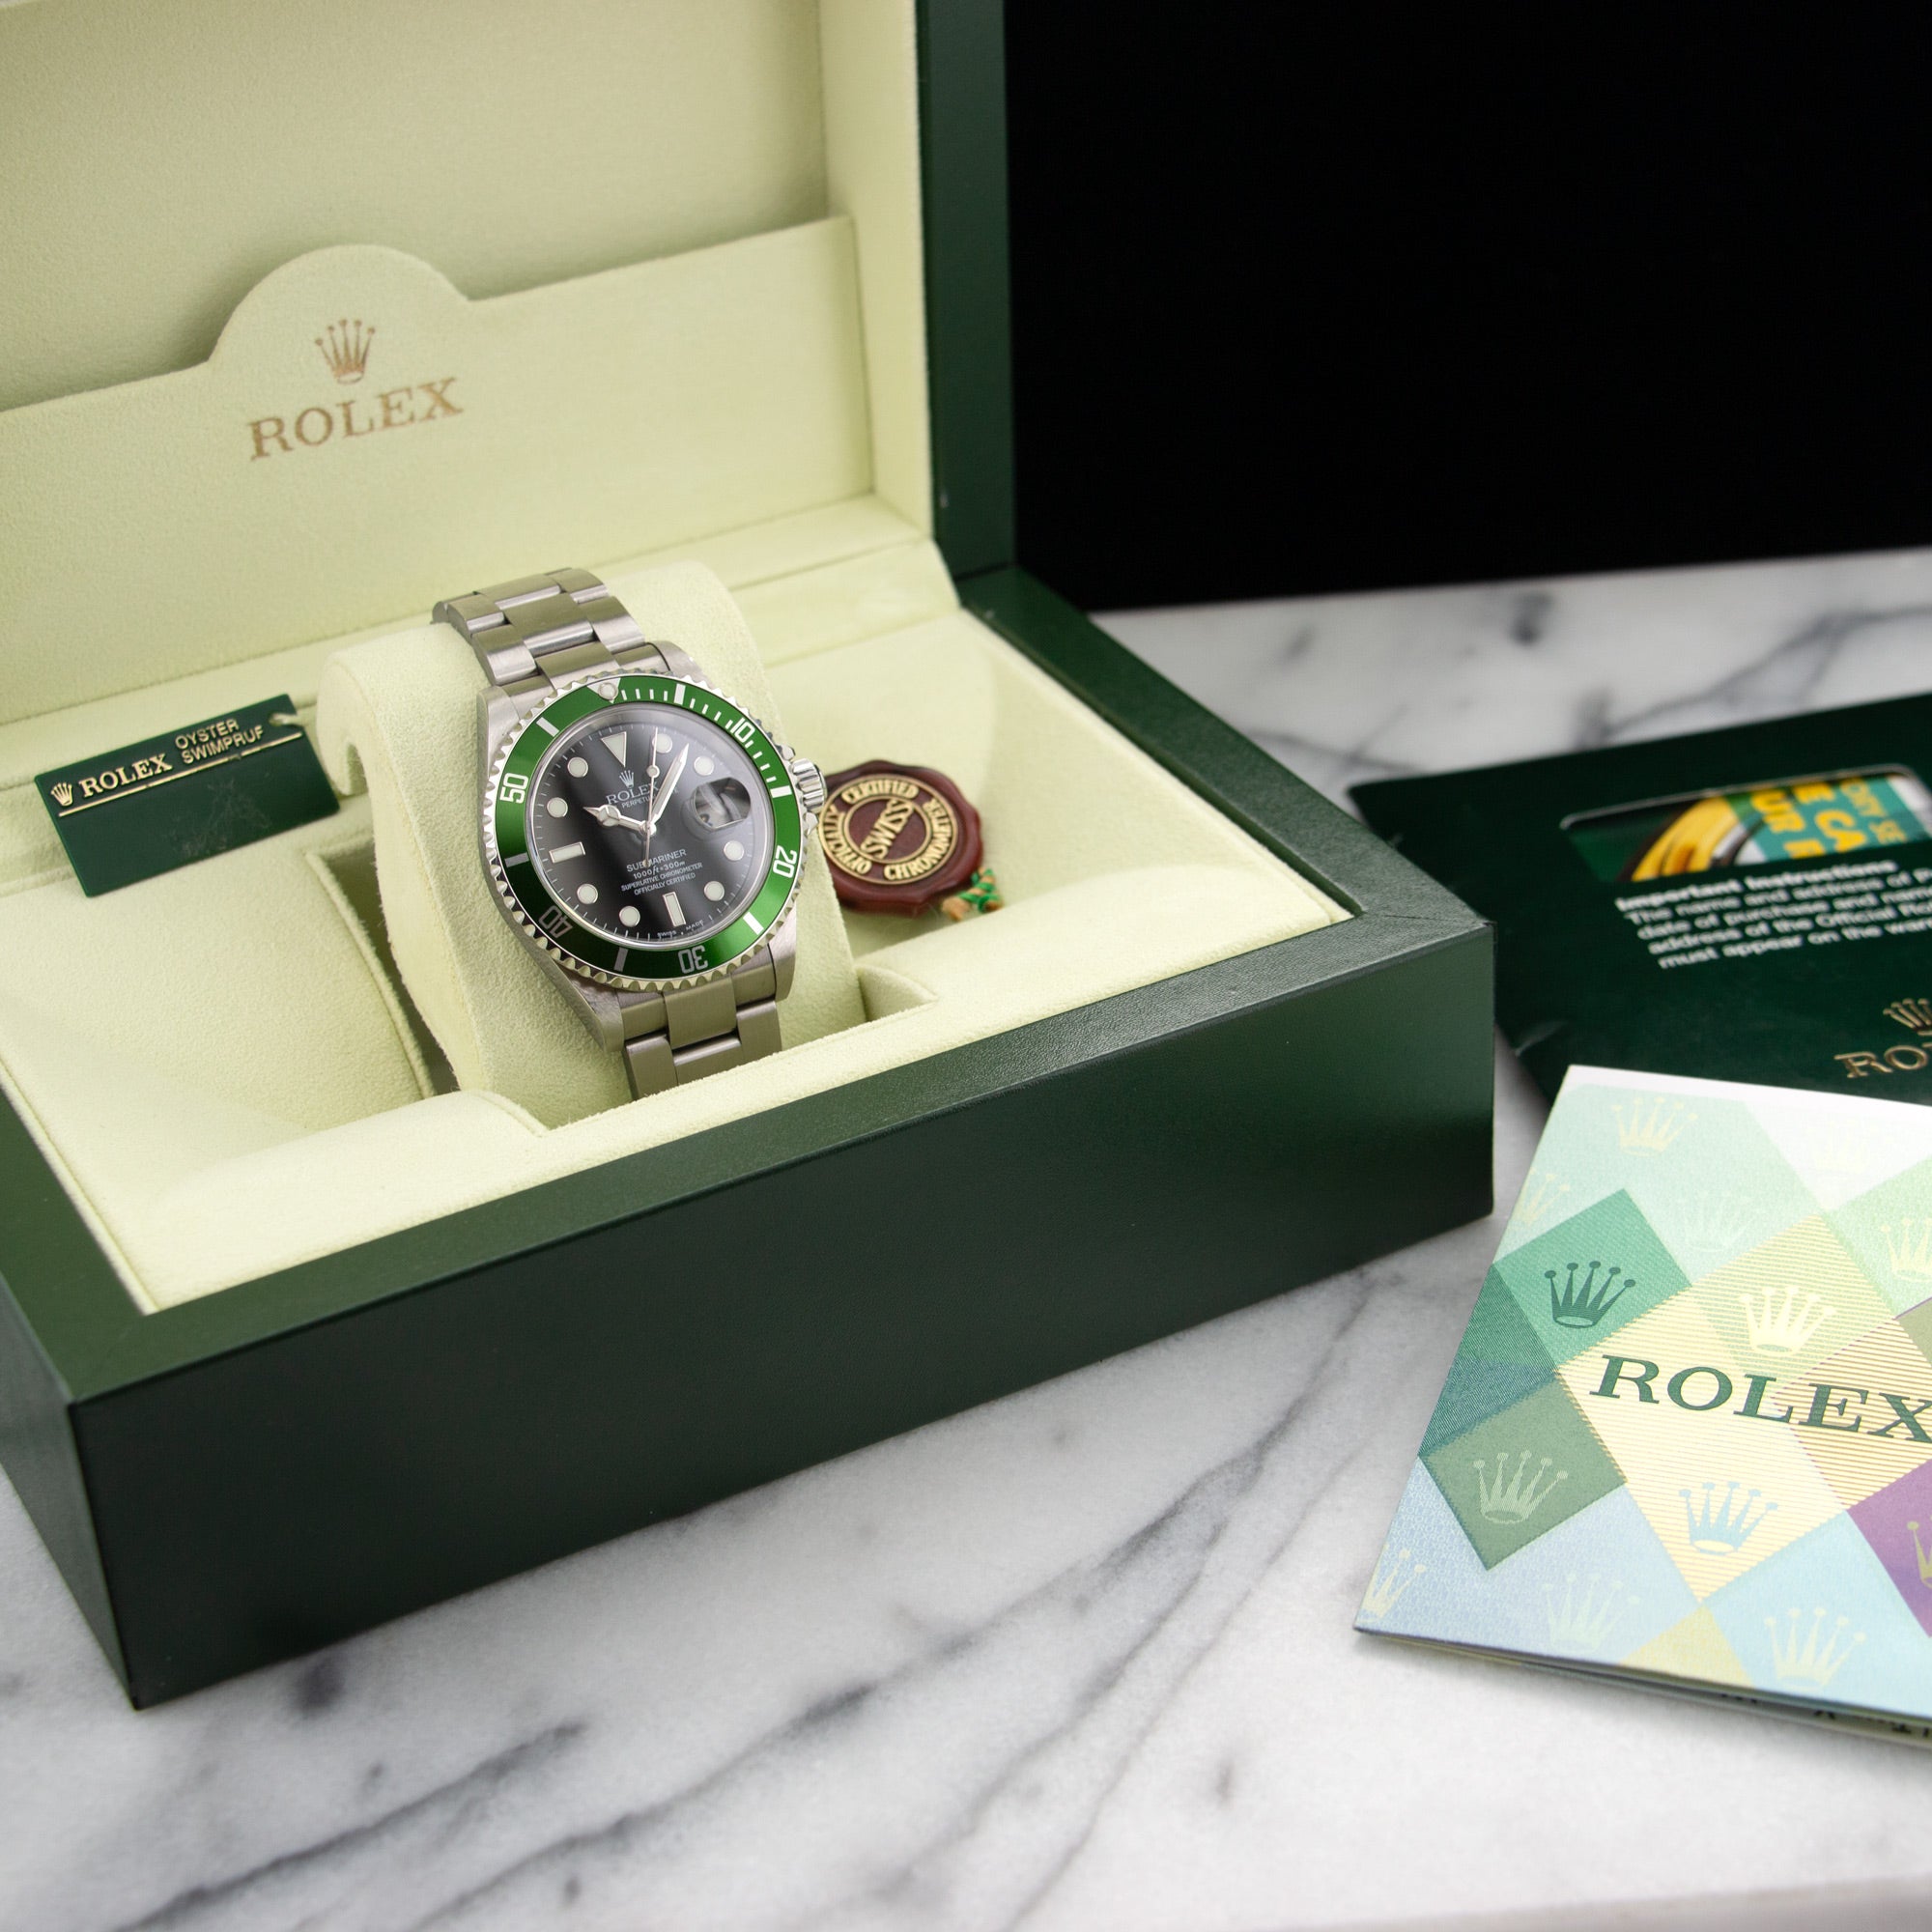 Rolex Submariner Flat IV Watch Ref. 16610 with Original Box and Papers